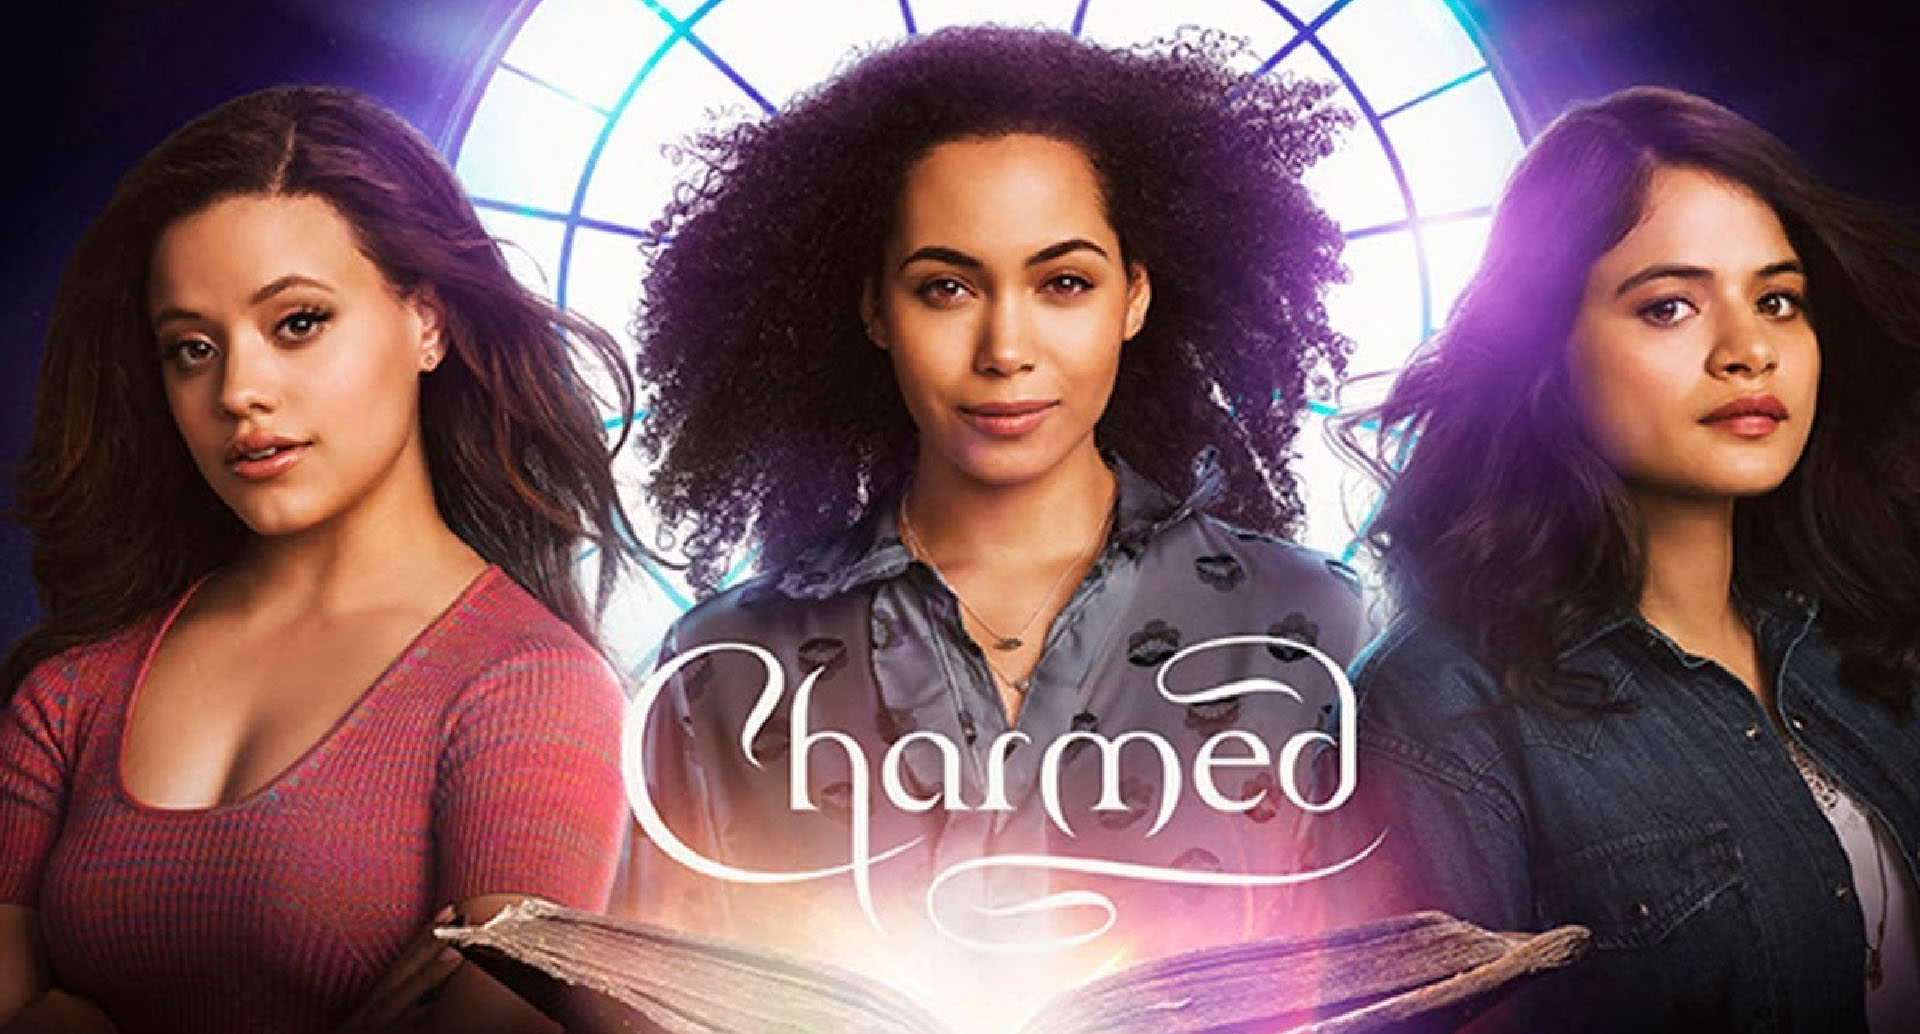 Charmed season one review